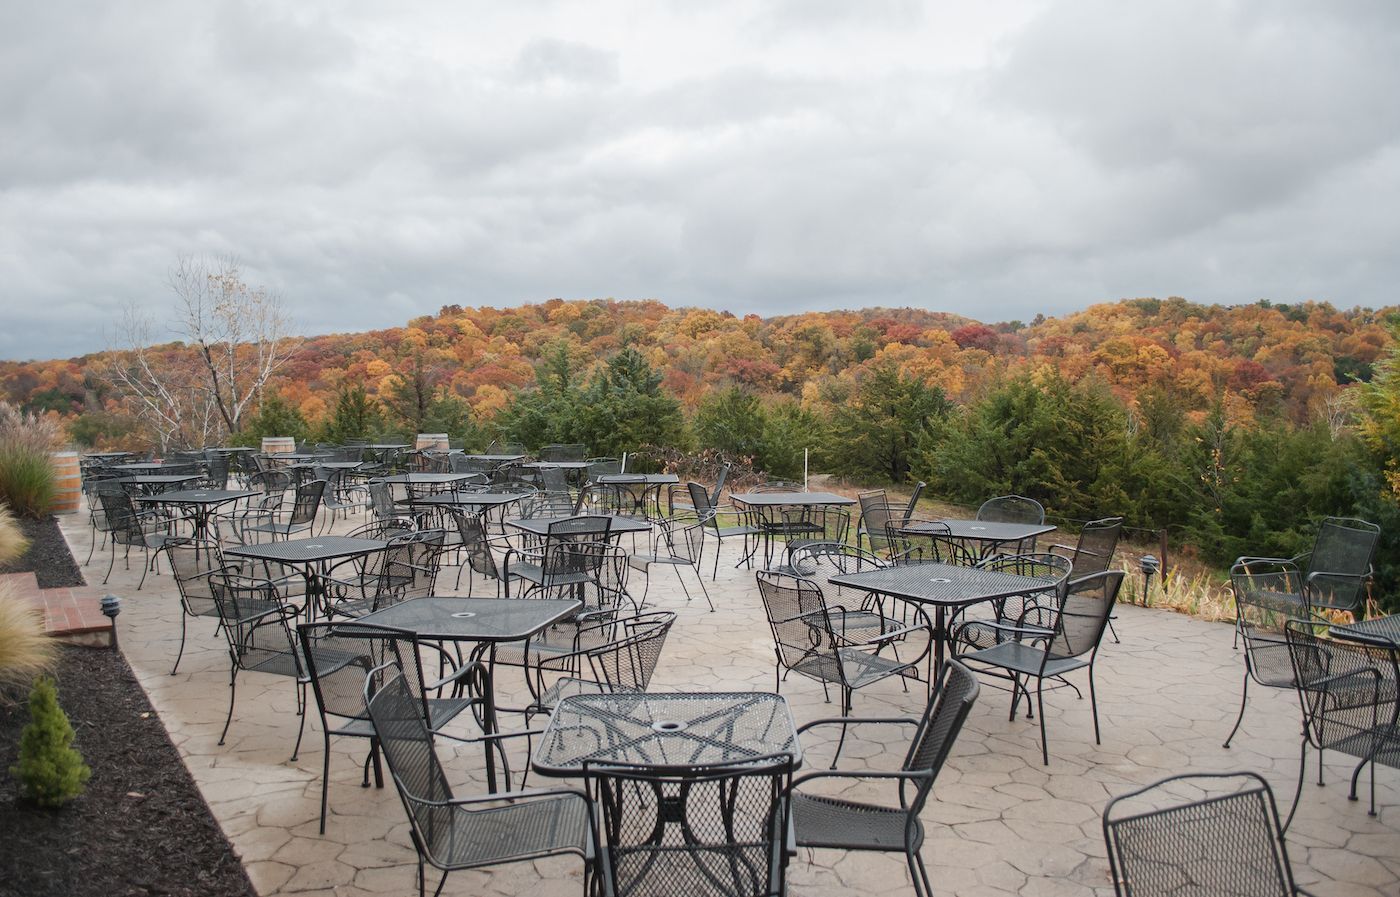 Plan a Small Get-Together at the Hill on Our Private Vineyard Patio. Book Your Event With Us Today.